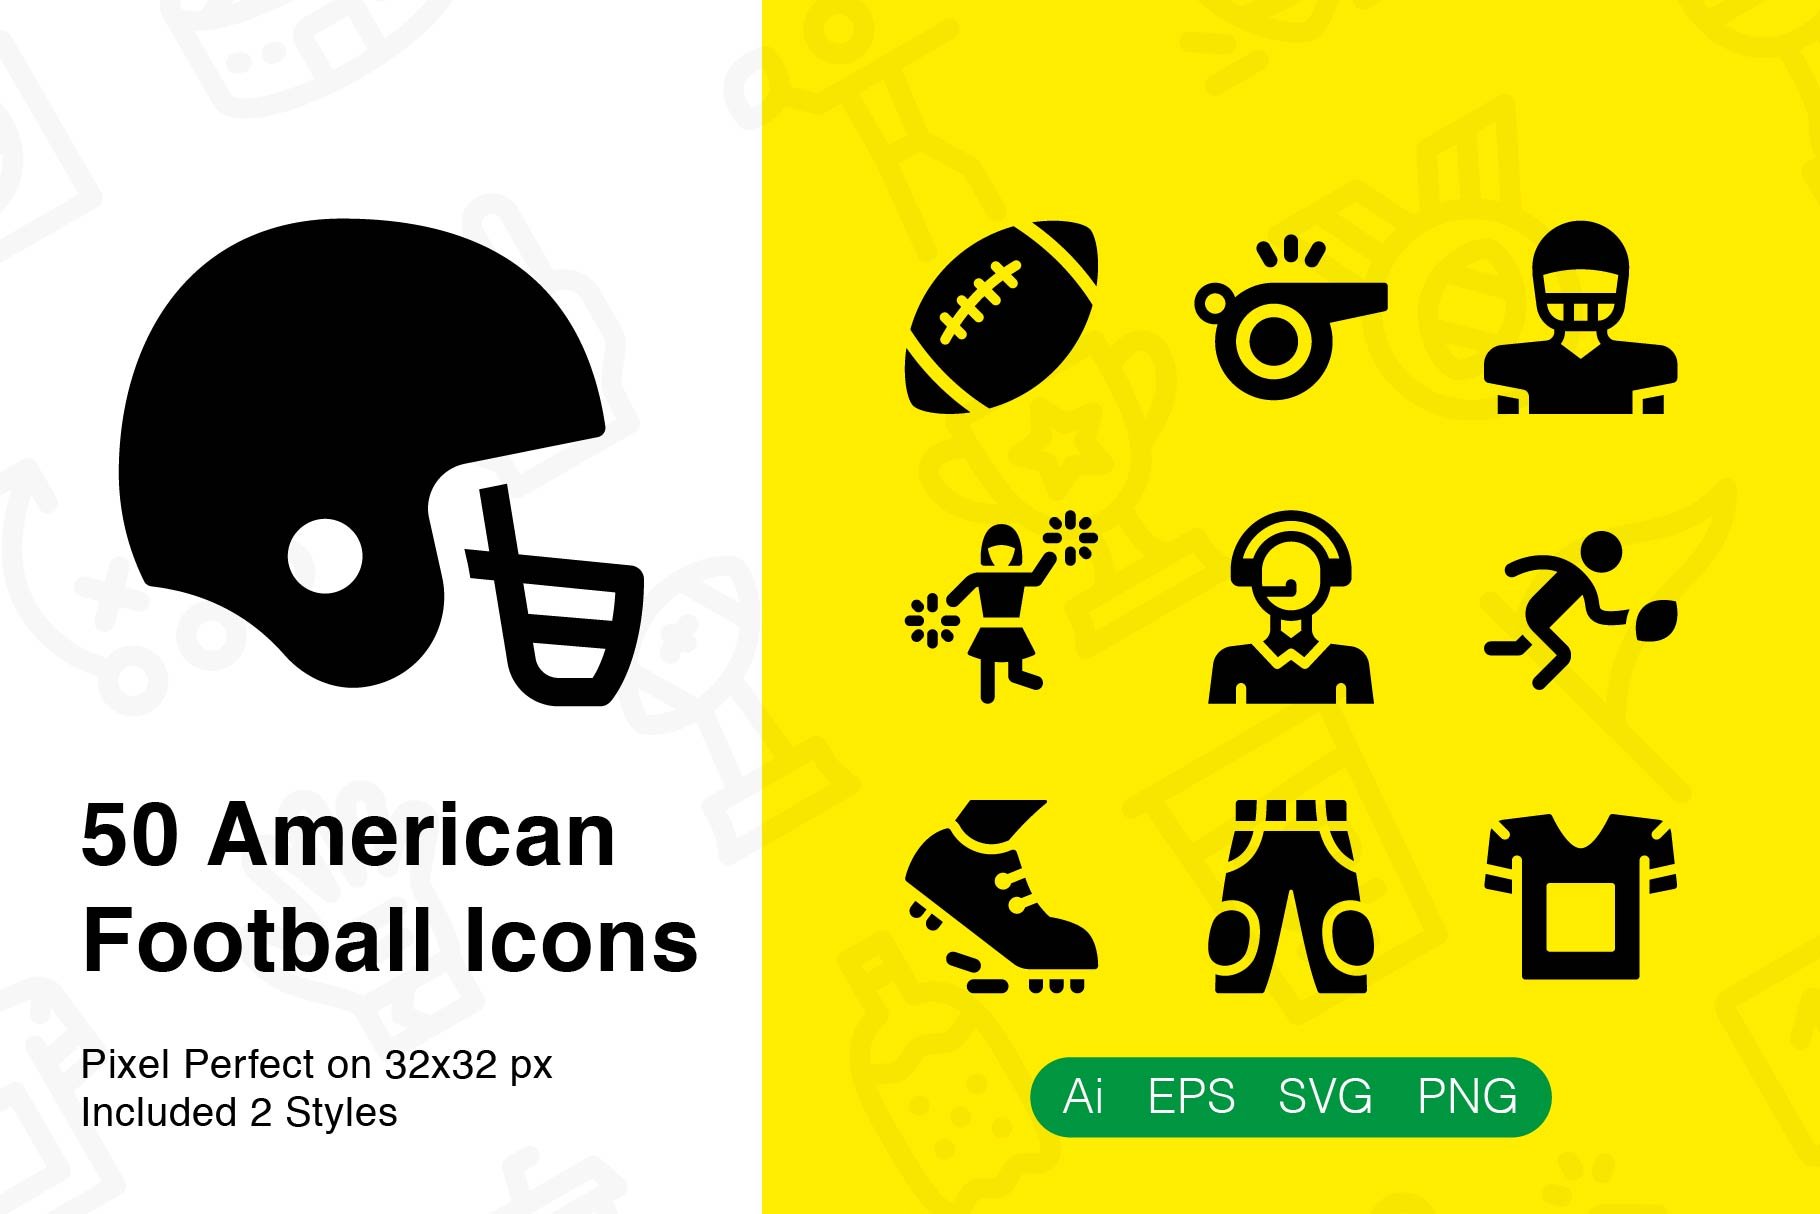 American Football Icons cover image.